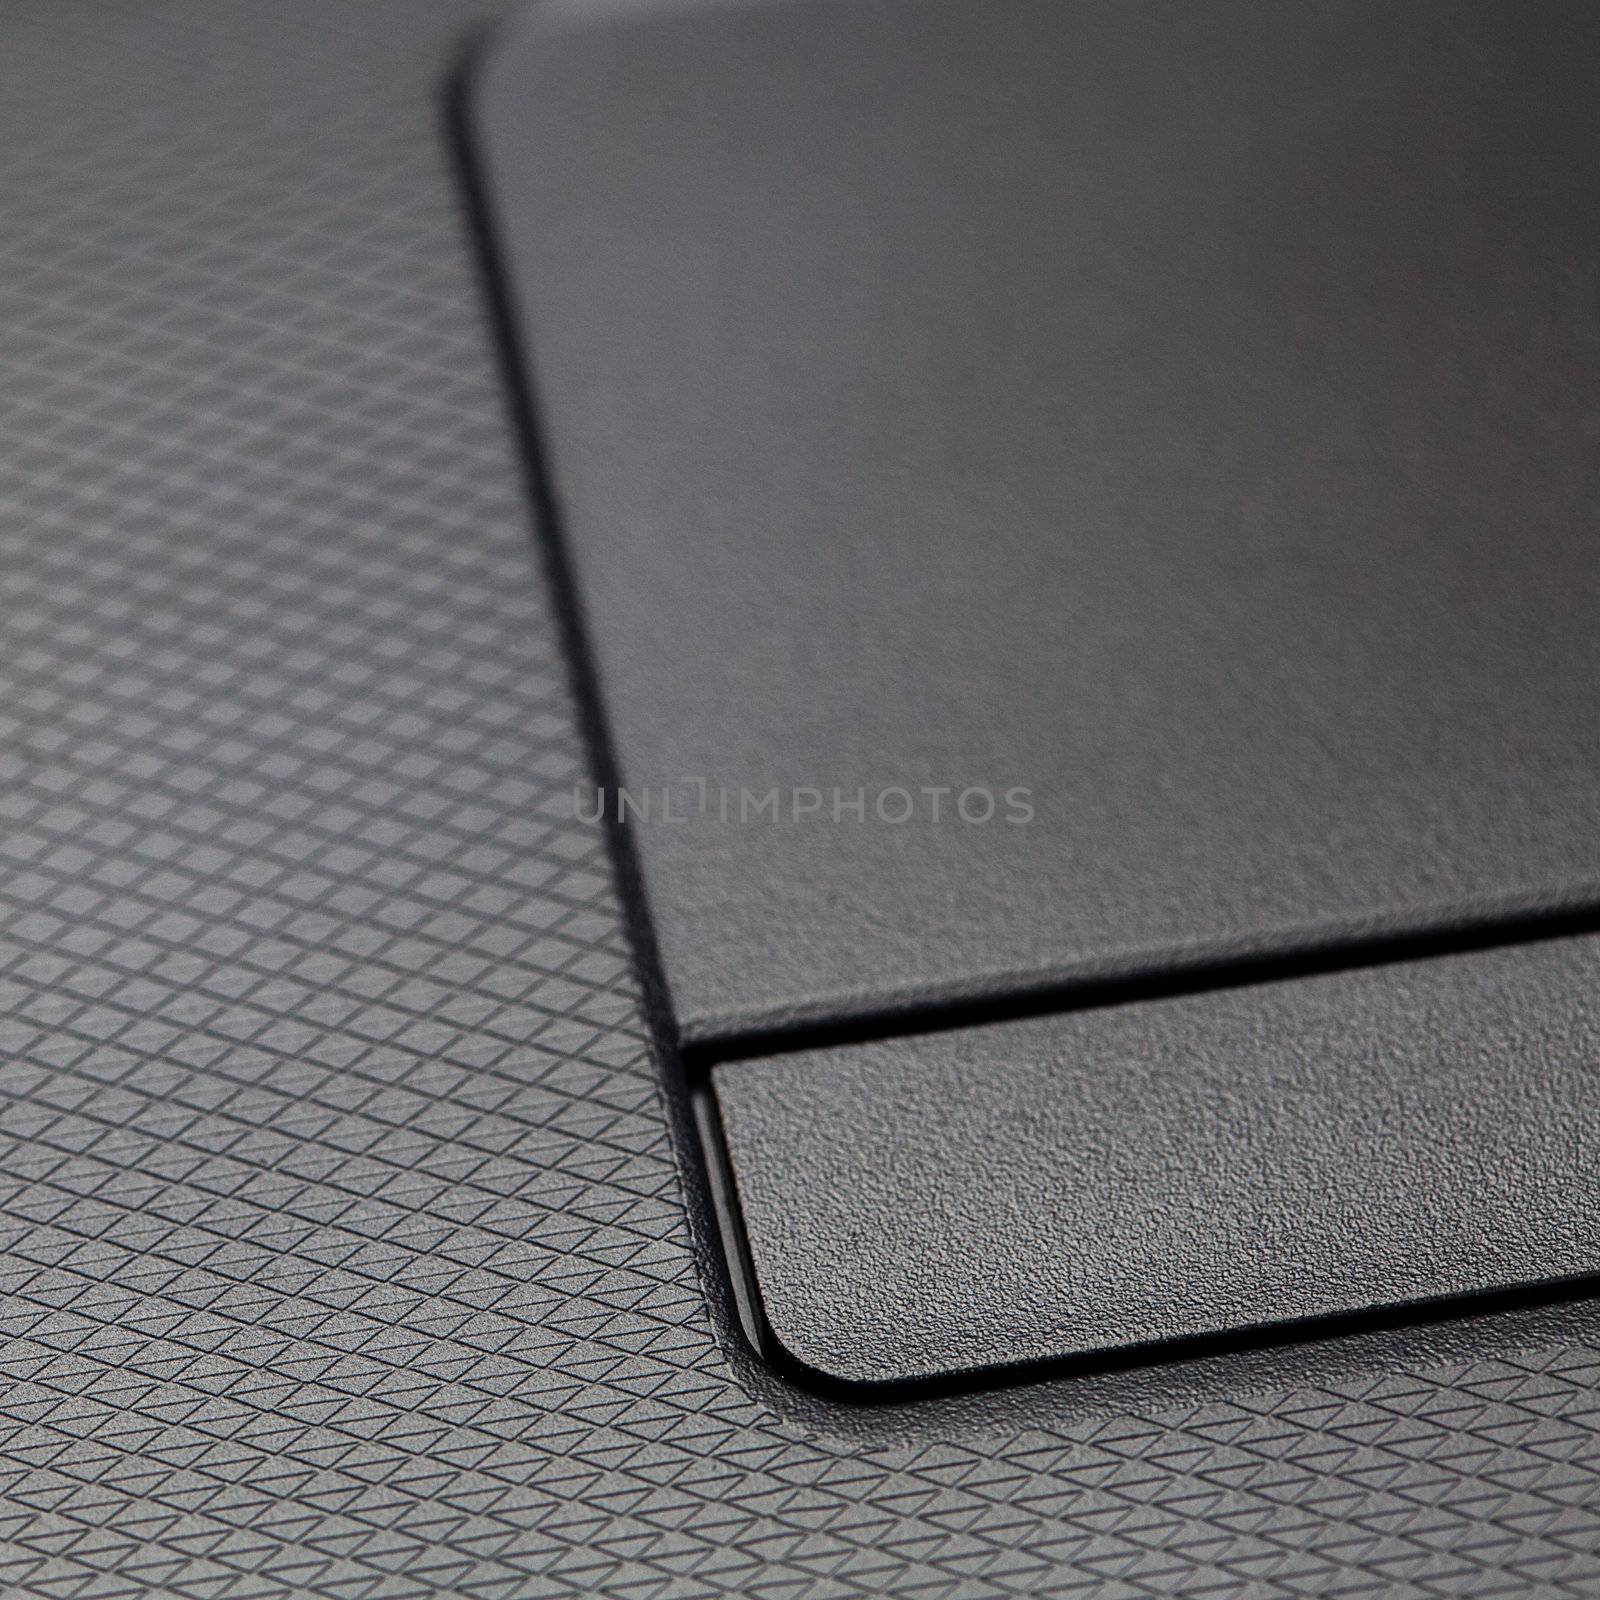 touchpad and keyboard laptop close-up